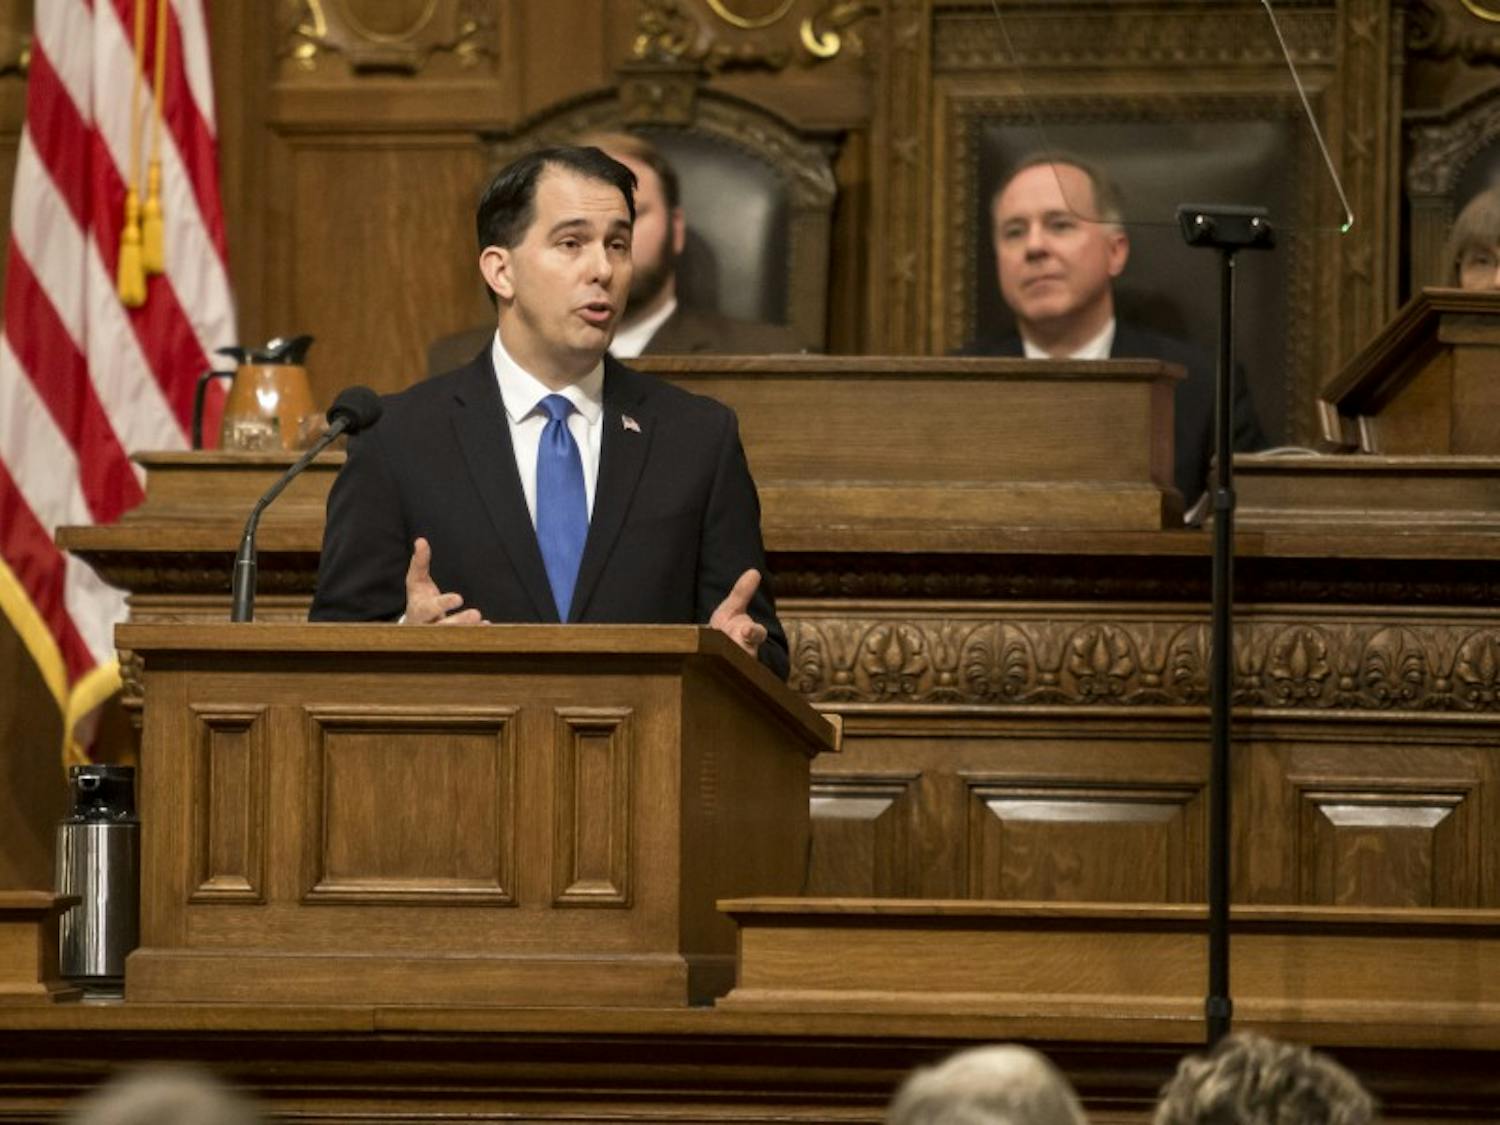 Gov. Scott Walker’s new child tax credit plan is being met with skepticism by some of his closest supporters.